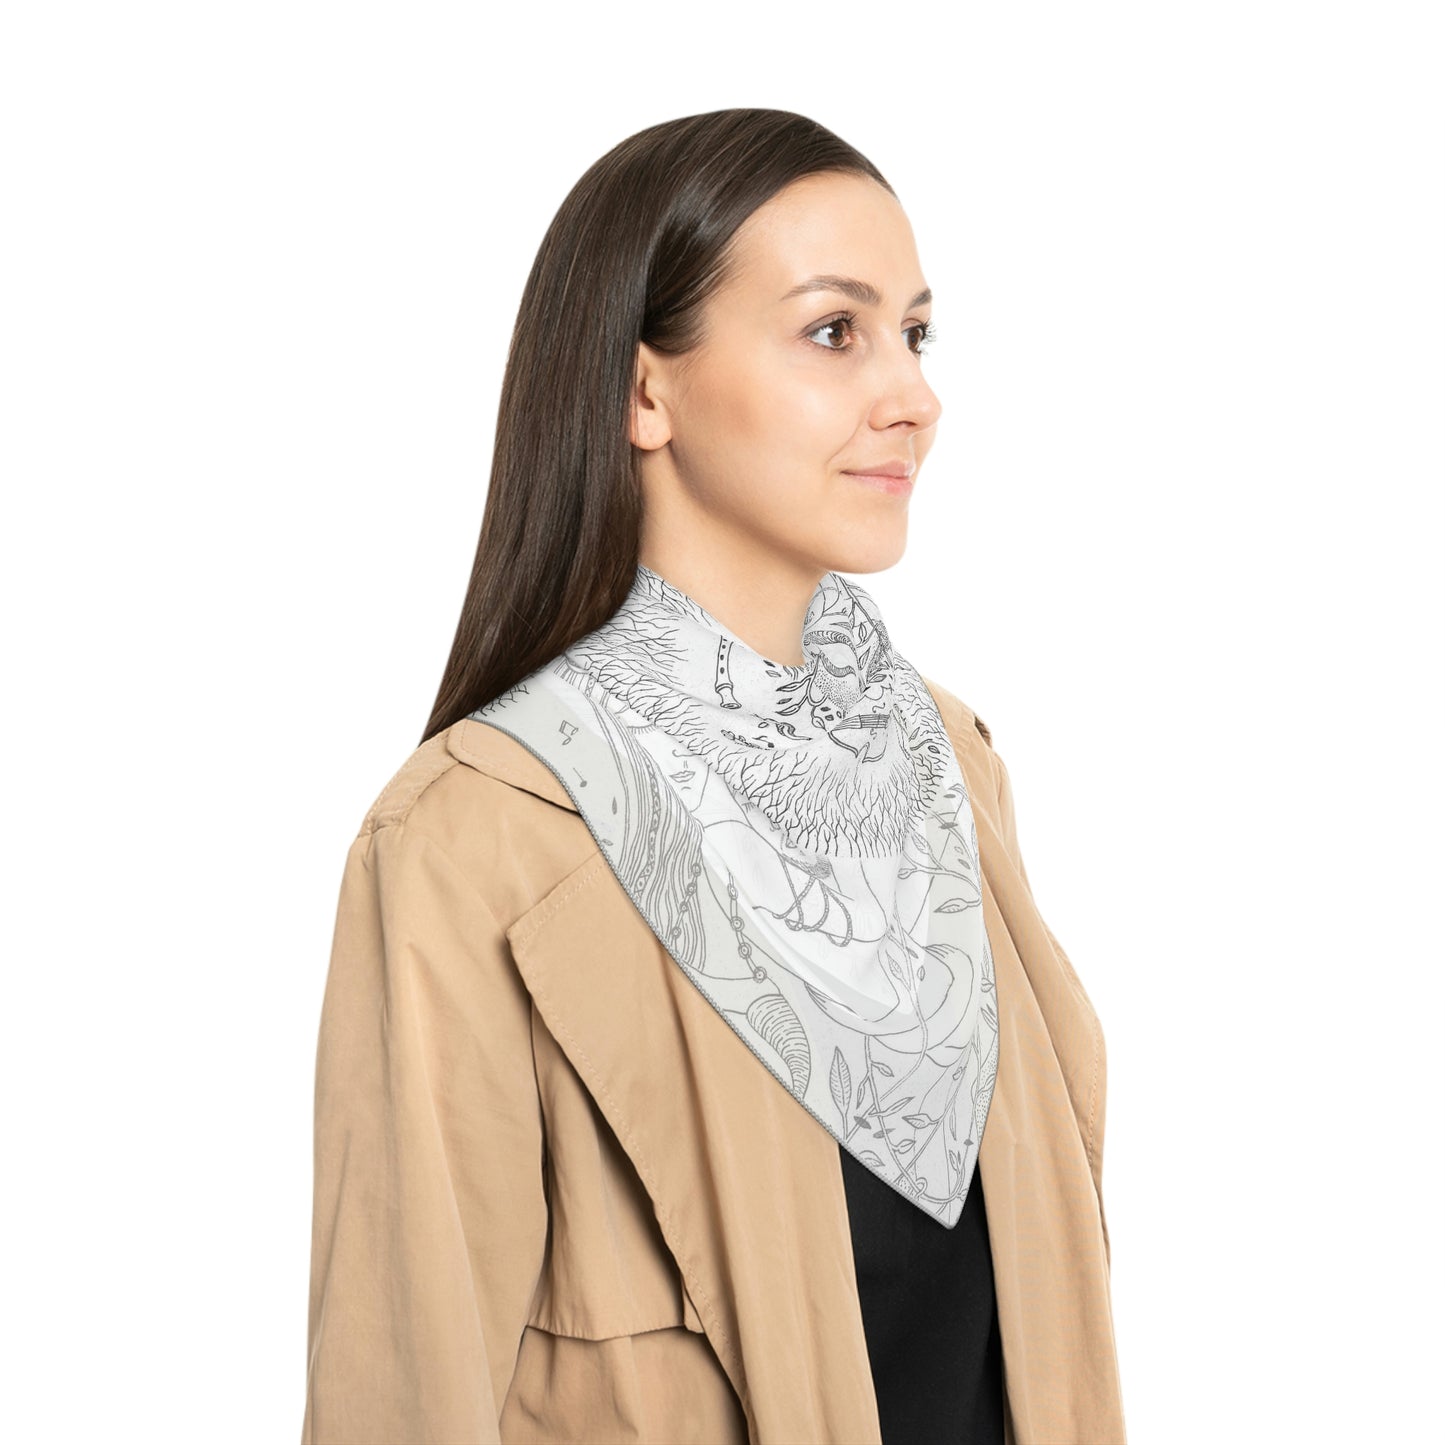 Chinese Years Zodiac Sign Poly Scarf (Ox) White